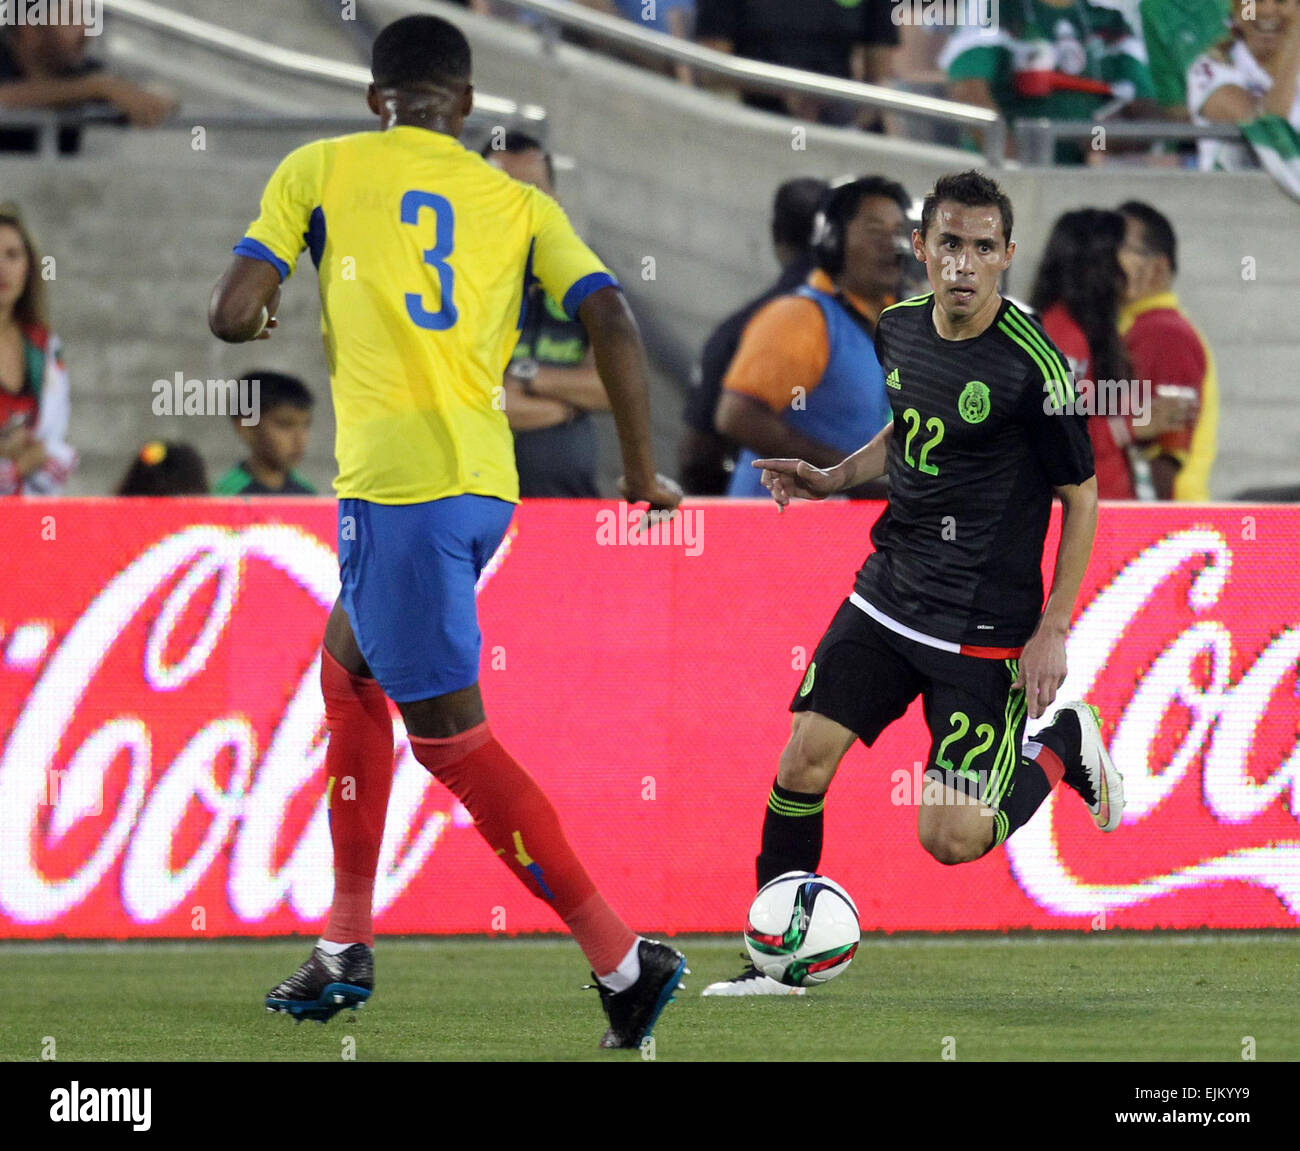 California, USA. 28th Mar, 2015. Mexico's Paul Aguilar (R) competes during the international friendly match against Ecuador, held in the Los Angeles Memorial Coliseum, in Los Angeles city, California state, the United States, on March 28, 2015. Mexico won 1-0. Credit:  Omar Vega/NOTIMEX/Xinhua/Alamy Live News Stock Photo